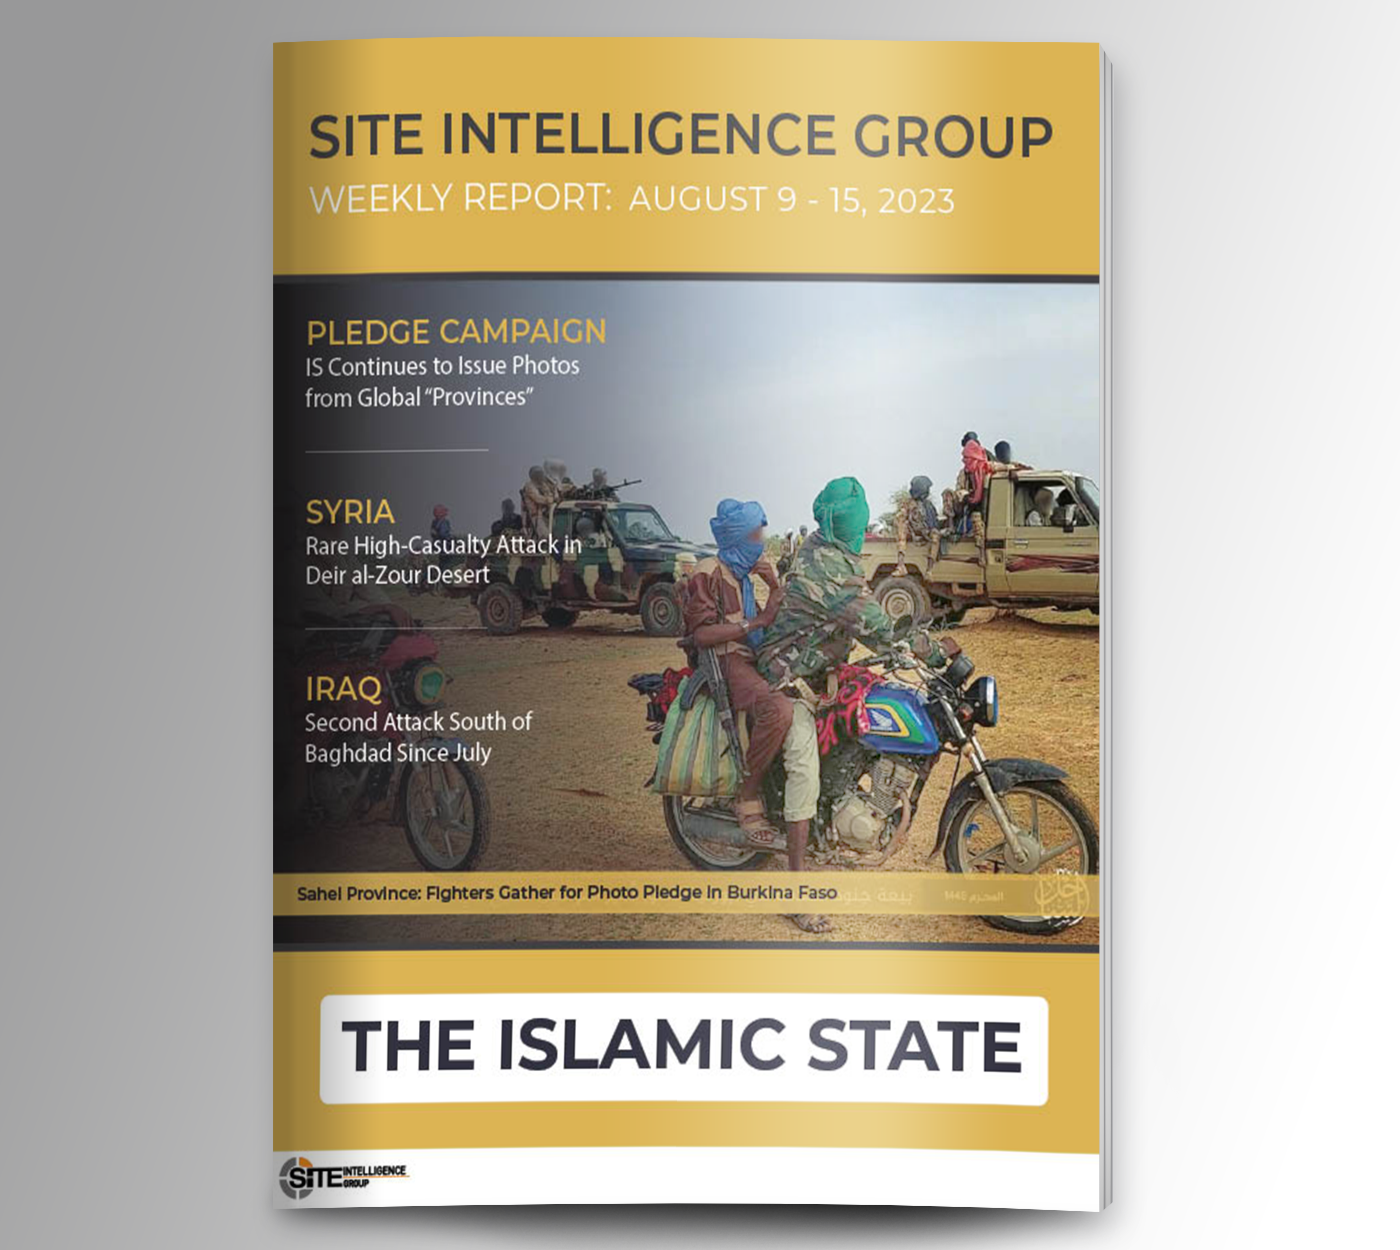 Weekly inSITE on the Islamic State for August 9-15, 2023